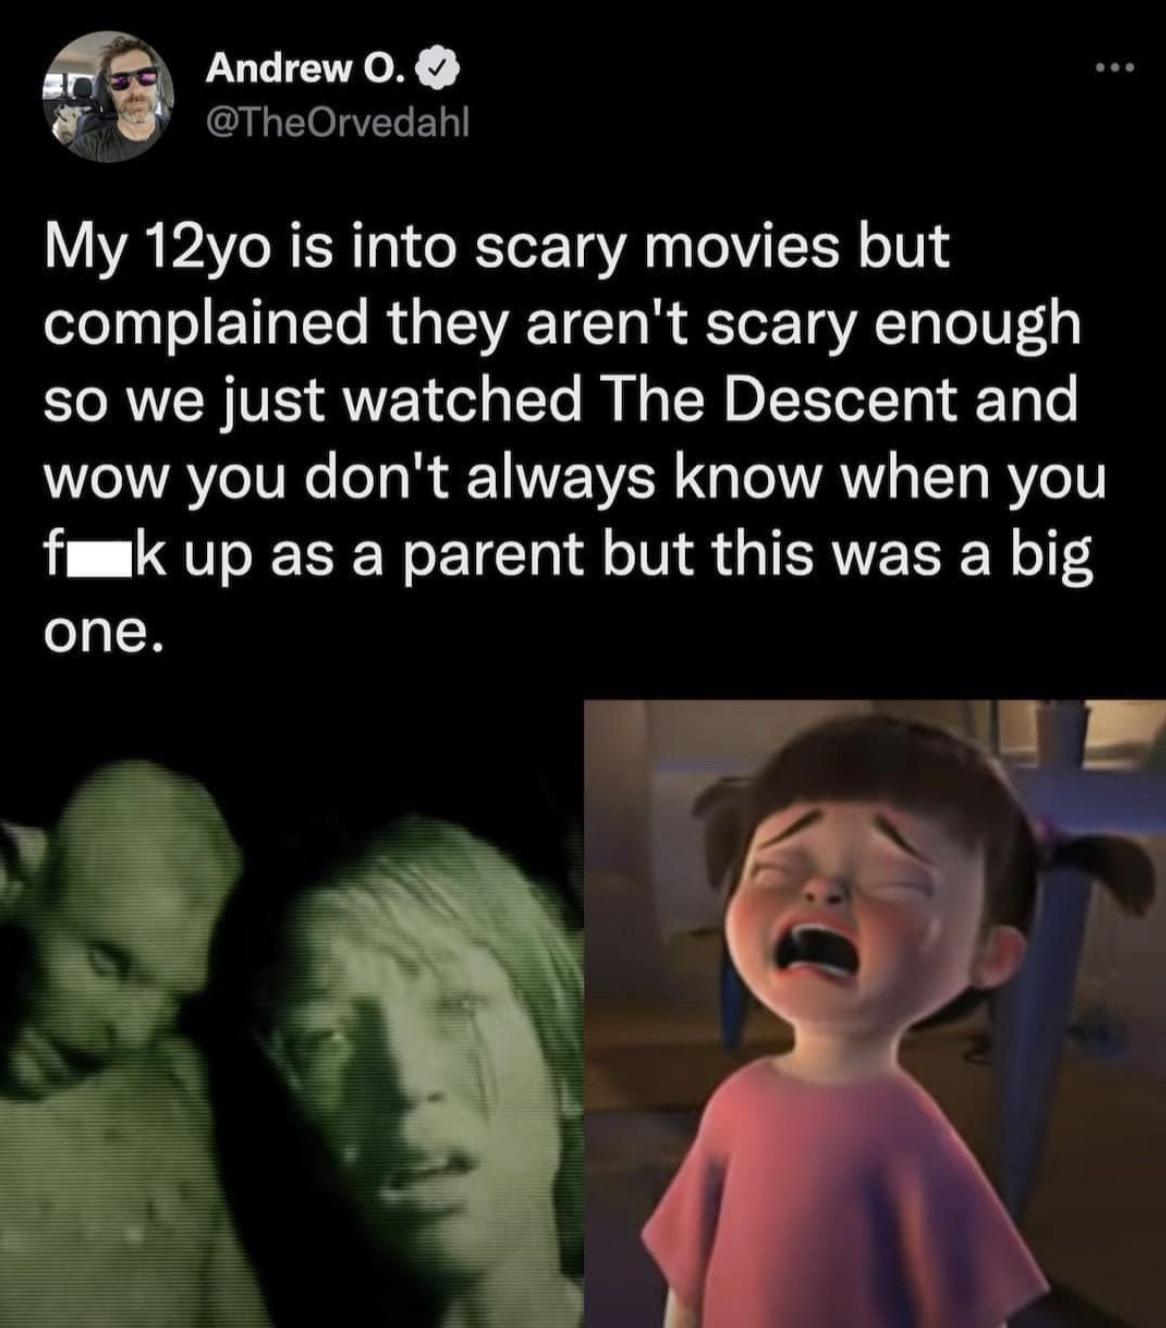 memes reddit twitter - head - Andrew O. ... My 12yo is into scary movies but complained they aren't scary enough so we just watched The Descent and wow you don't always know when you fk up as a parent but this was a big one.